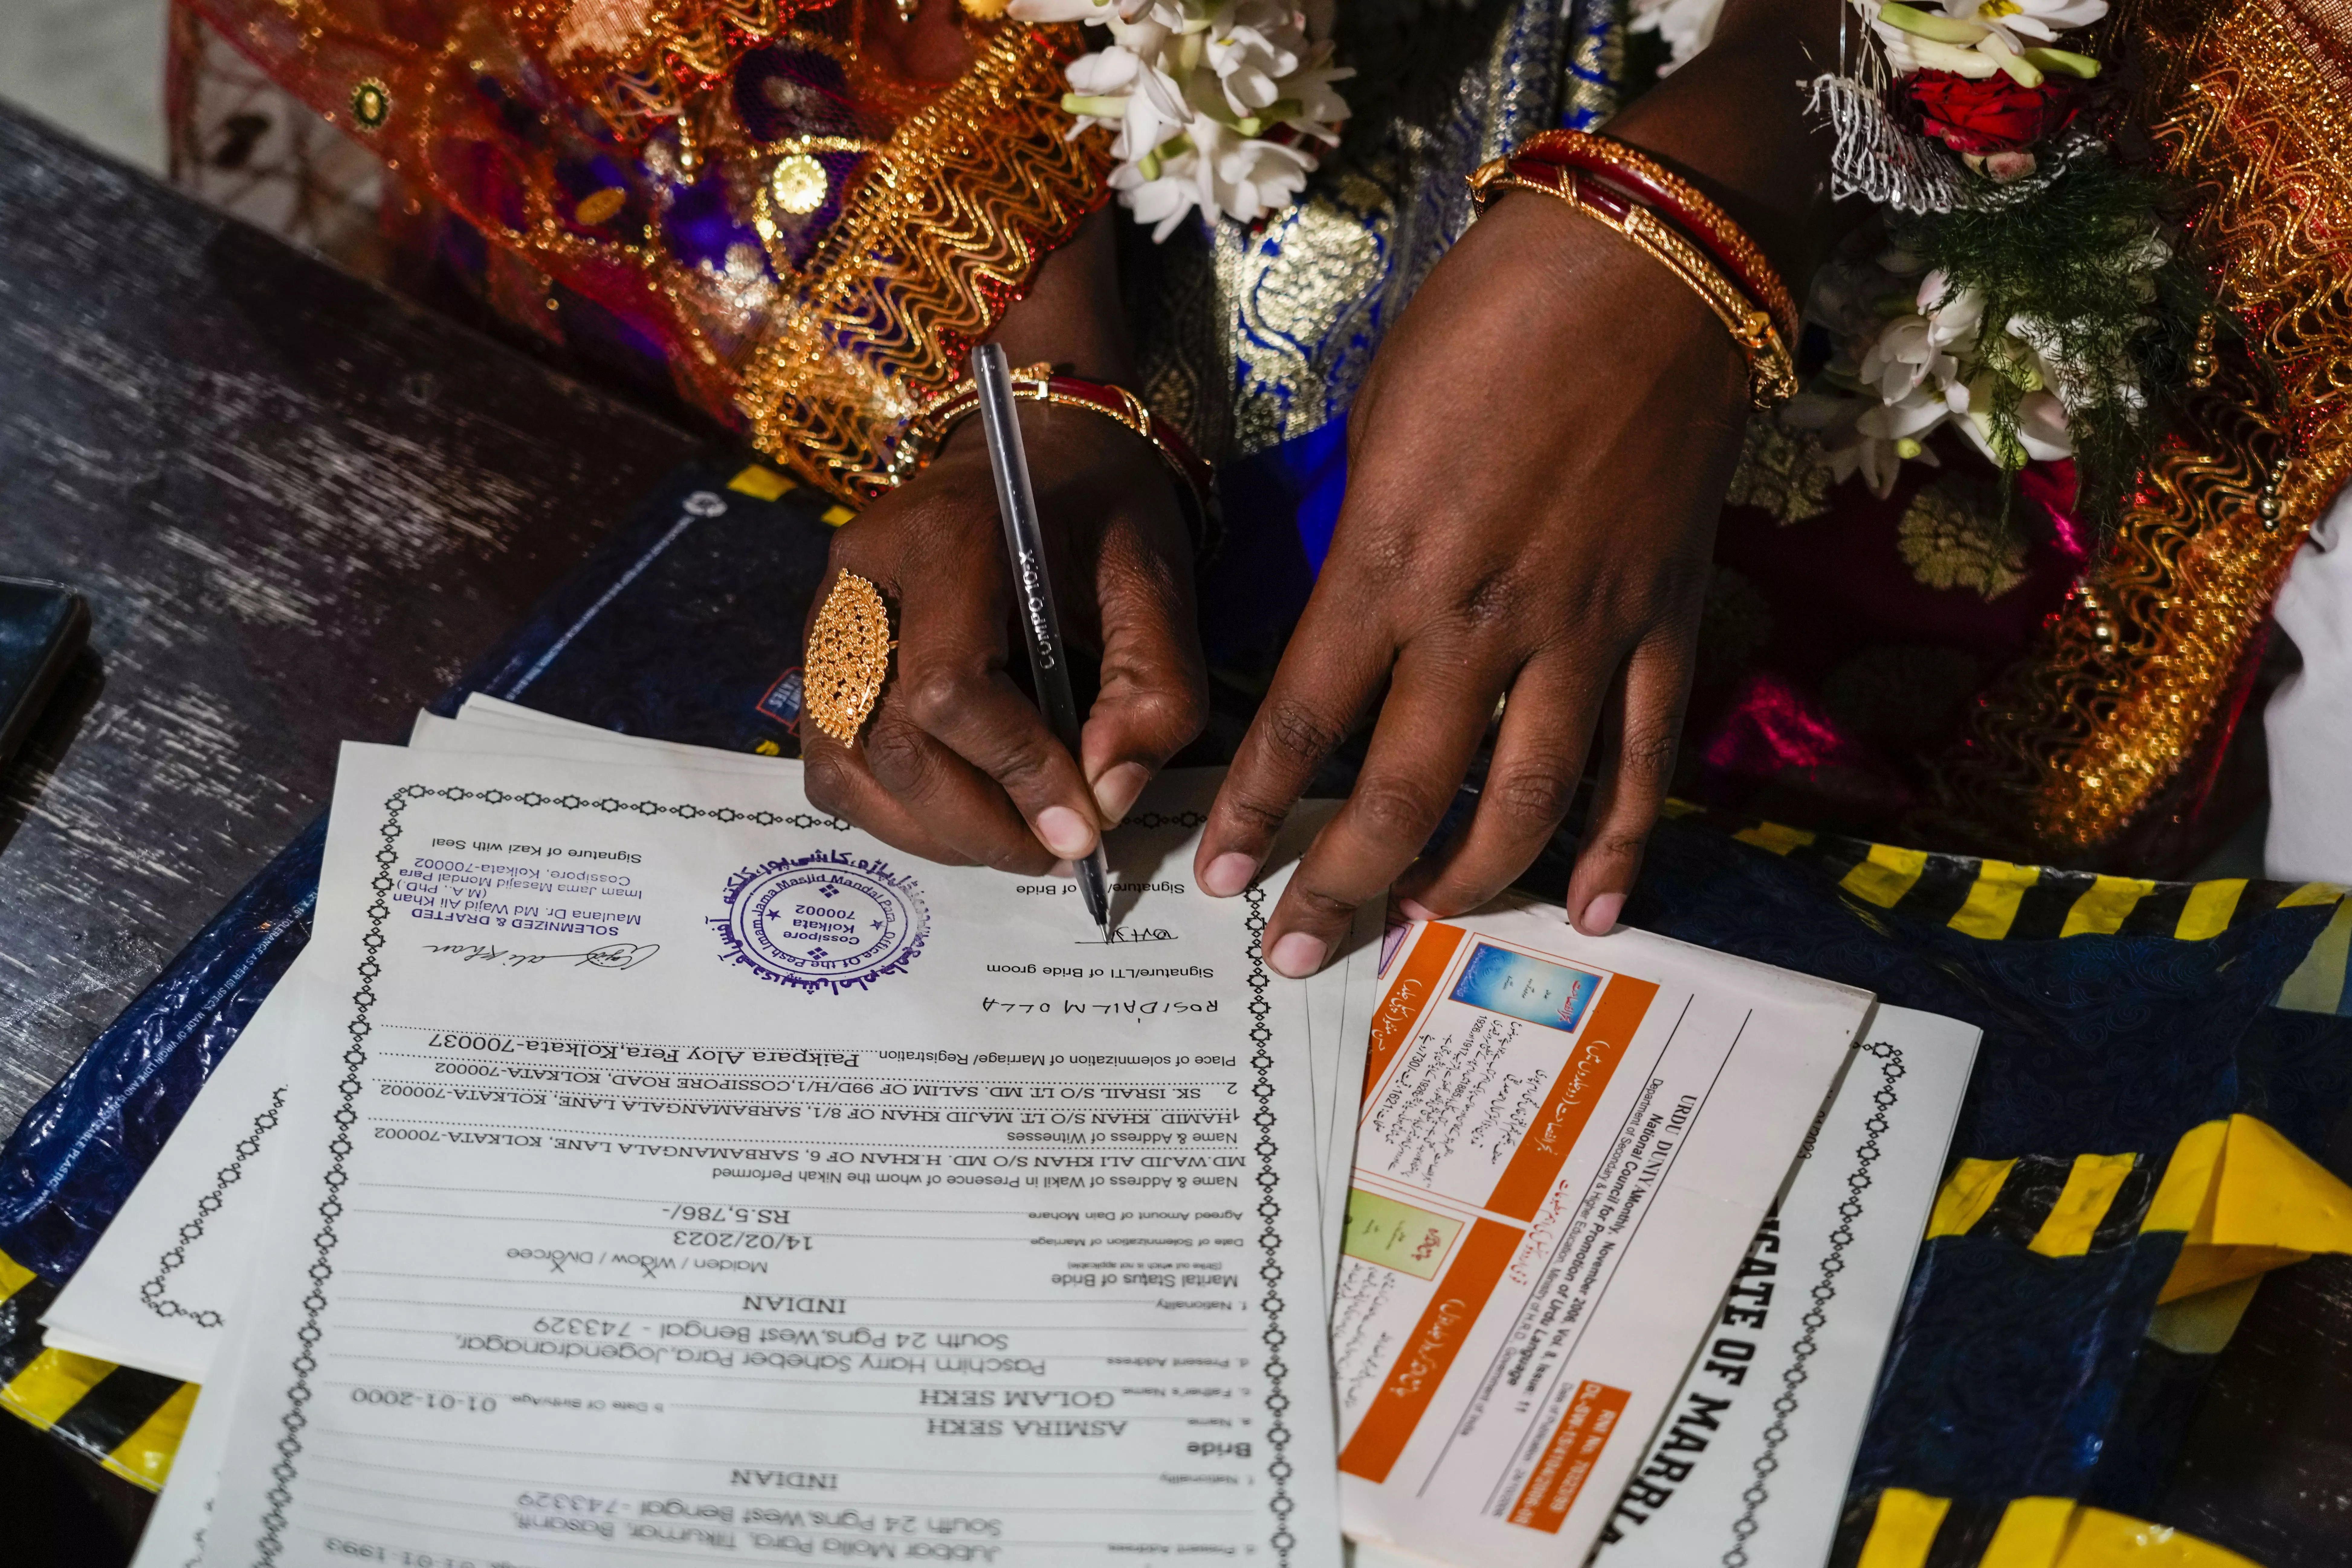 Law to check NRIs, OCIs marrying Indians